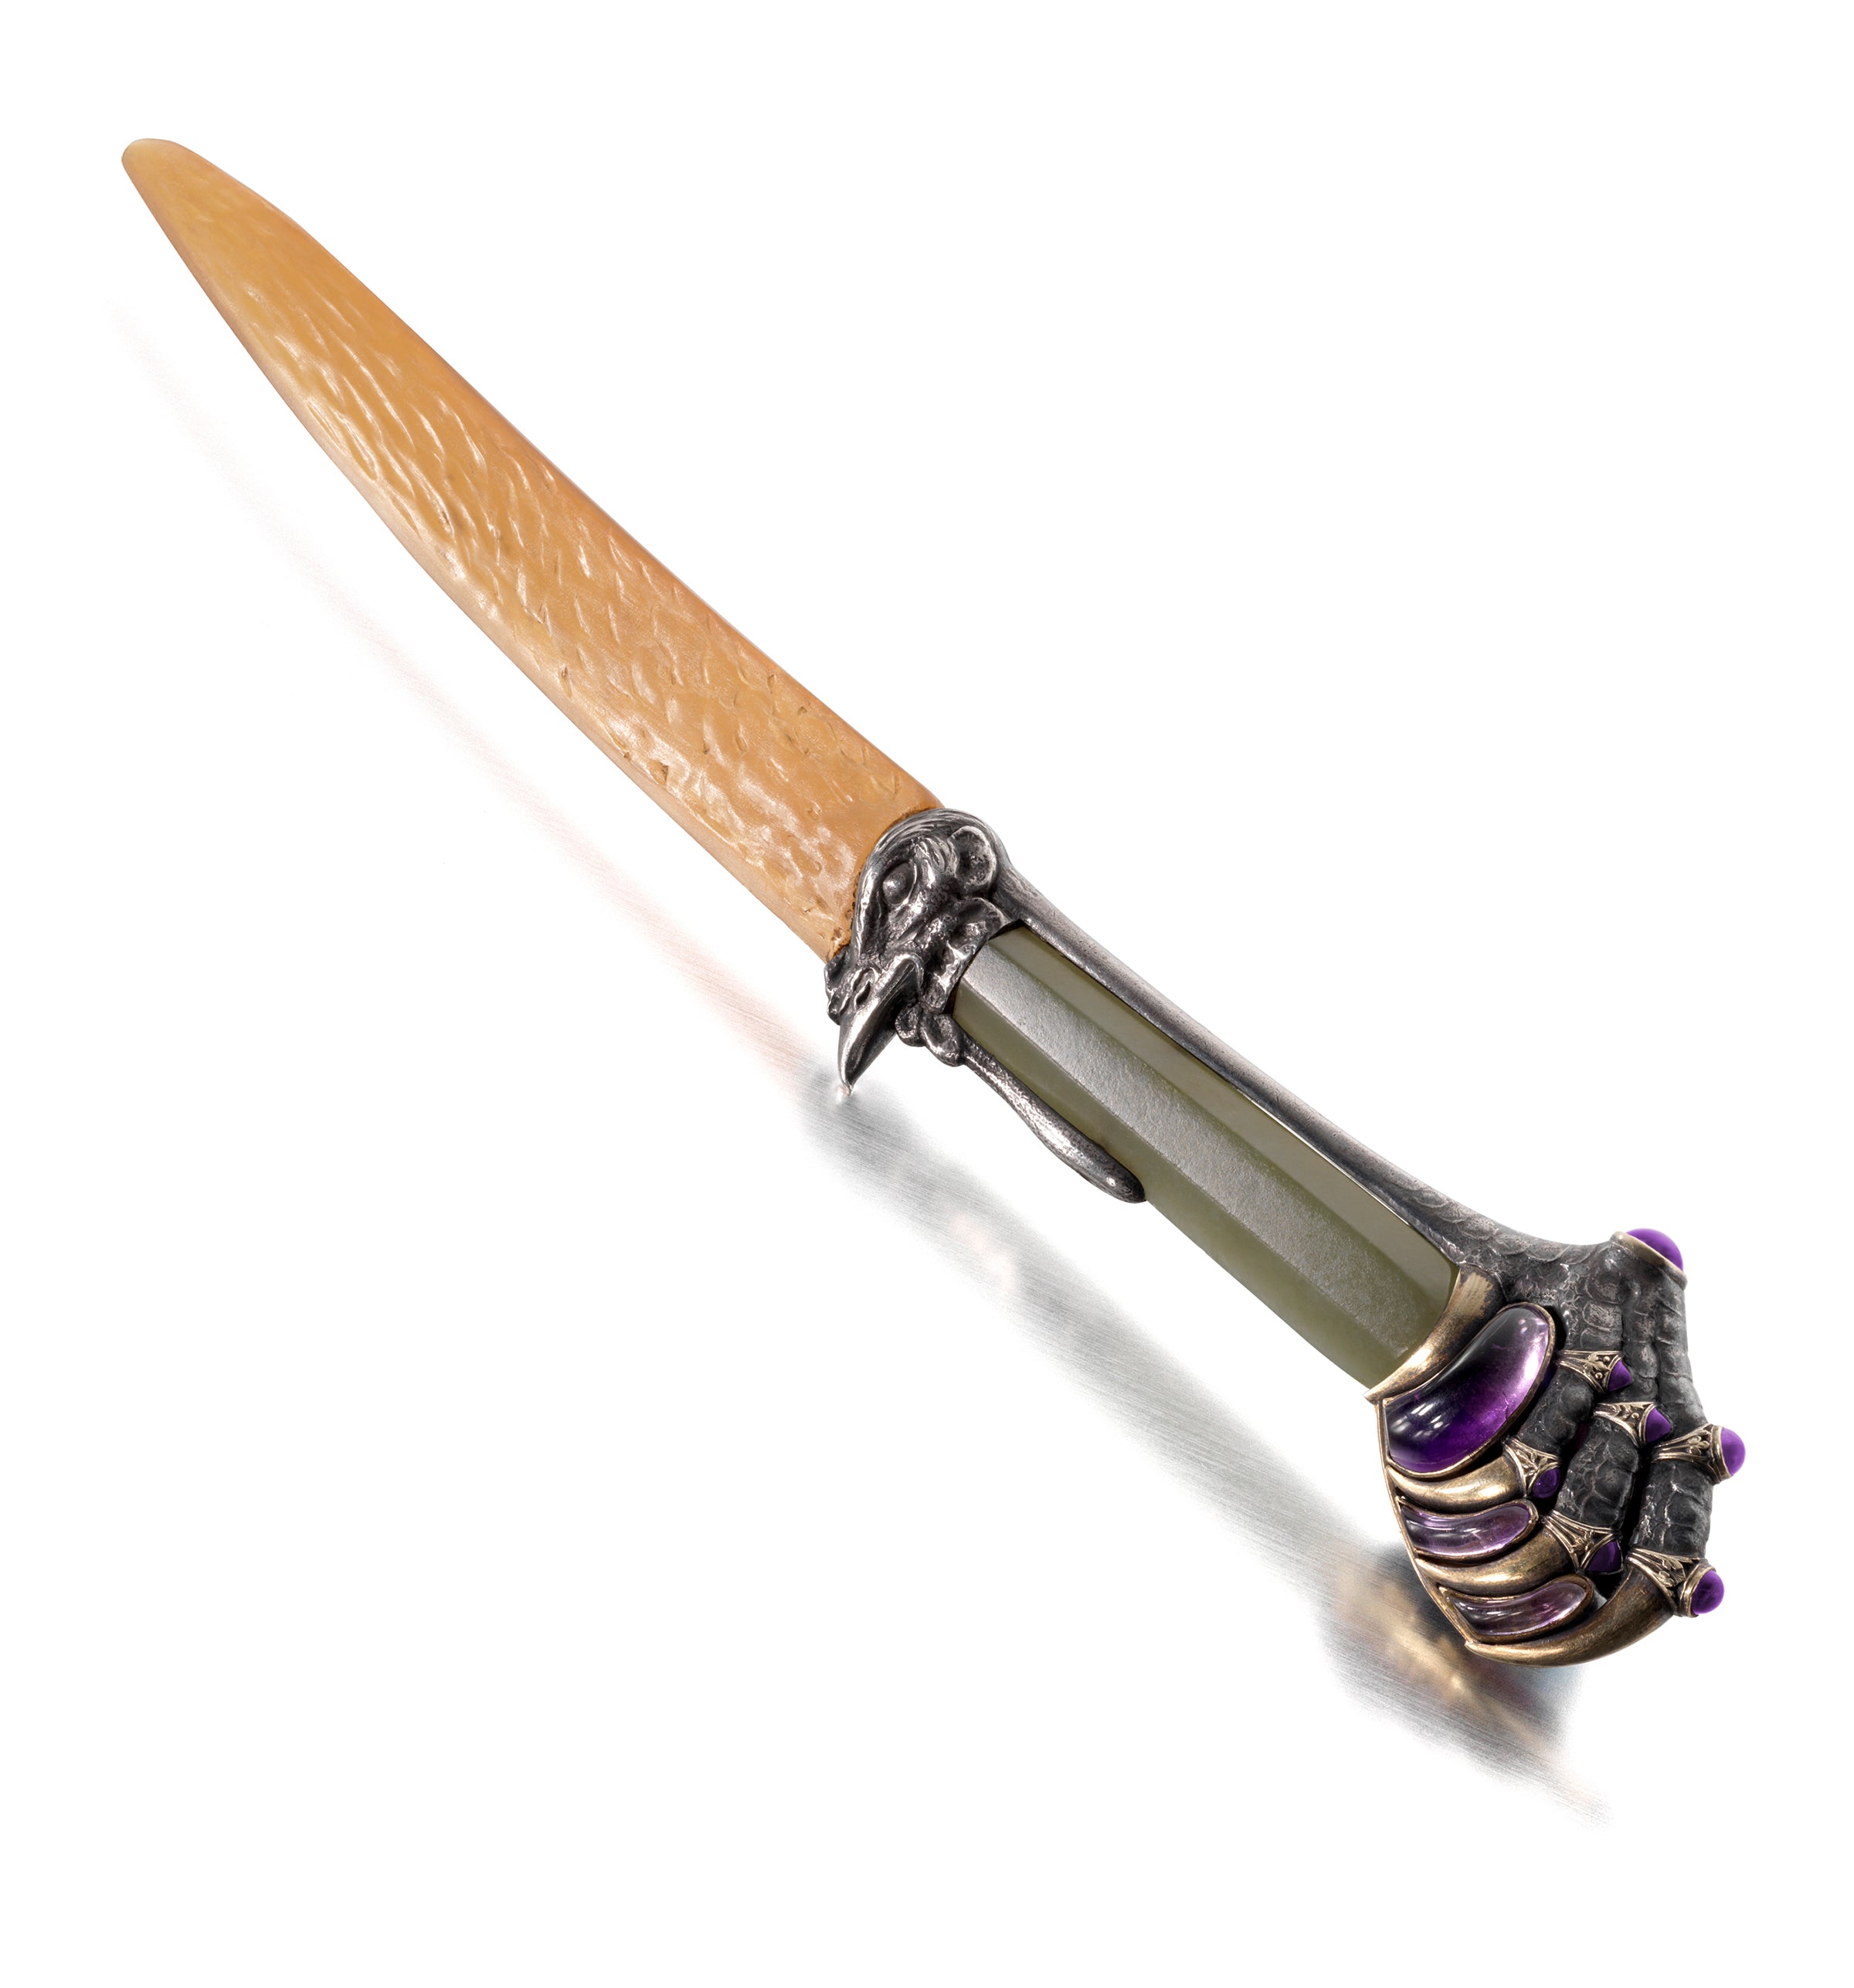 AMETHYST,  JADE,  AND  HORN  LETTER  OPENER  BY  RENÉ  LALIQUE,  PARIS,  CIRCA  1903